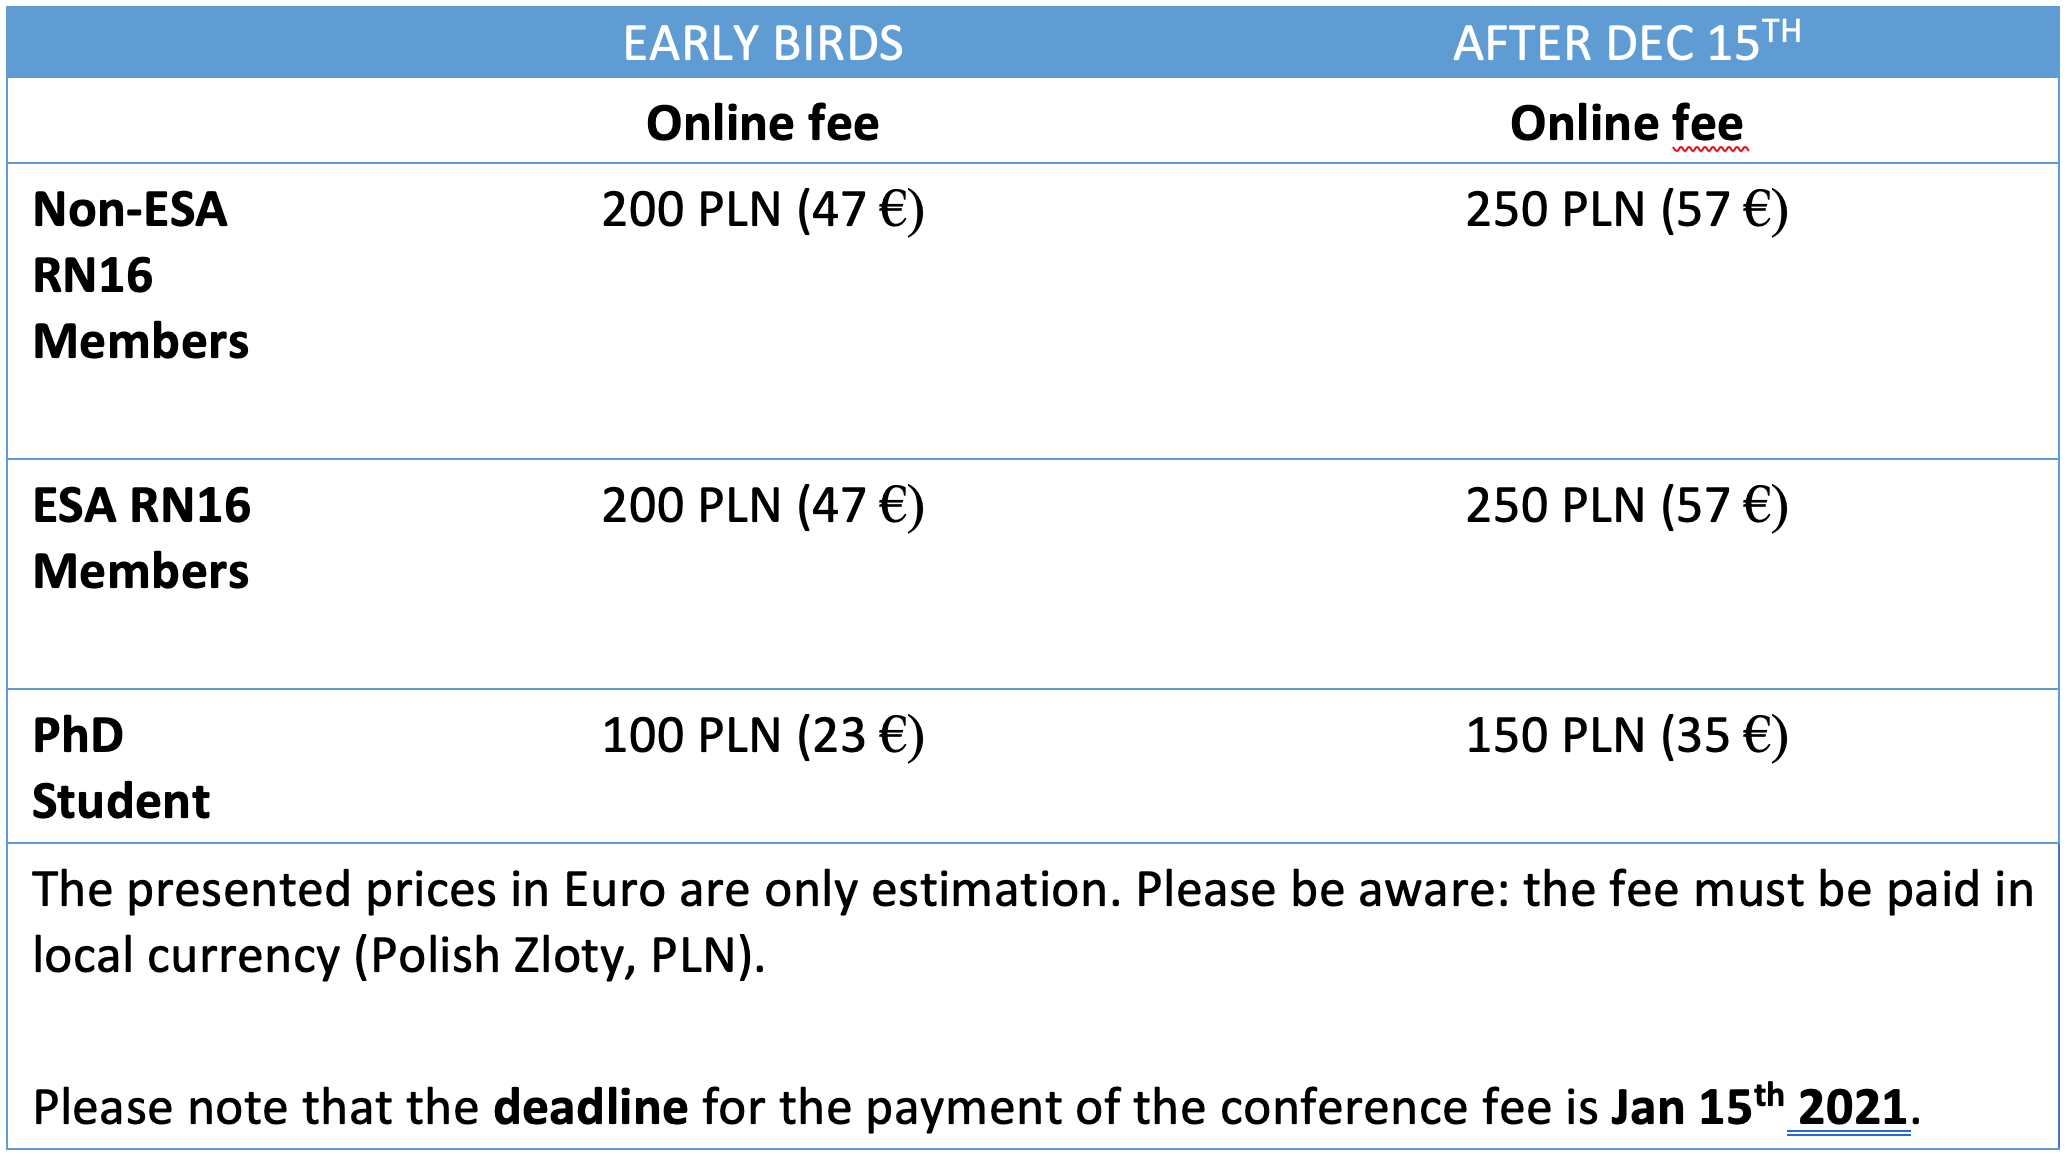 A. Early birds fees:  Non-ESA RN16 Members - regular fee 600 PLN (142 EUR), full fee 750 PLN (180 EUR), online fee 200 PLN (47 EUR); ESA RN16 Members -  regular fee 450 PLN (107 EUR), full fee 600 PLN (142 EUR), Online fee 200 PLN (47 EUR); PhD Students - regular fee 200 PLN (47 EUR), full fee 400 PLN (100 EUR), Online fee 100 PLN (23 EUR);  B. After 15th Dec fees: Non-ESA RN16 Members - regular fee 700 PLN (166 EUR), full fee 850 PLN (202 EUR), online fee 250 PLN (47 EUR); ESA RN16 Members - regular fee 550 PLN (130 EUR), full fee 700 PLN (166 EUR), online fee 250 PLN (47 EUR); PhD Students - regular fee 300 PLN (75 EUR), regular fee 500 PLN (119 EUR), online 150 EUR (35 EUR). The presented prices in Euro are only estimation. Please be aware that the fee has to be in local currency (Polish Zloty, PLN).  Regular conference fee includes: - conference bag; - coffee and catered lunch breaks;  Full conference fee includes: - conference bag; - coffee and catered lunch breaks; - an evening social dinner on 18th June; - a visit to the Jagiellonian Museum.